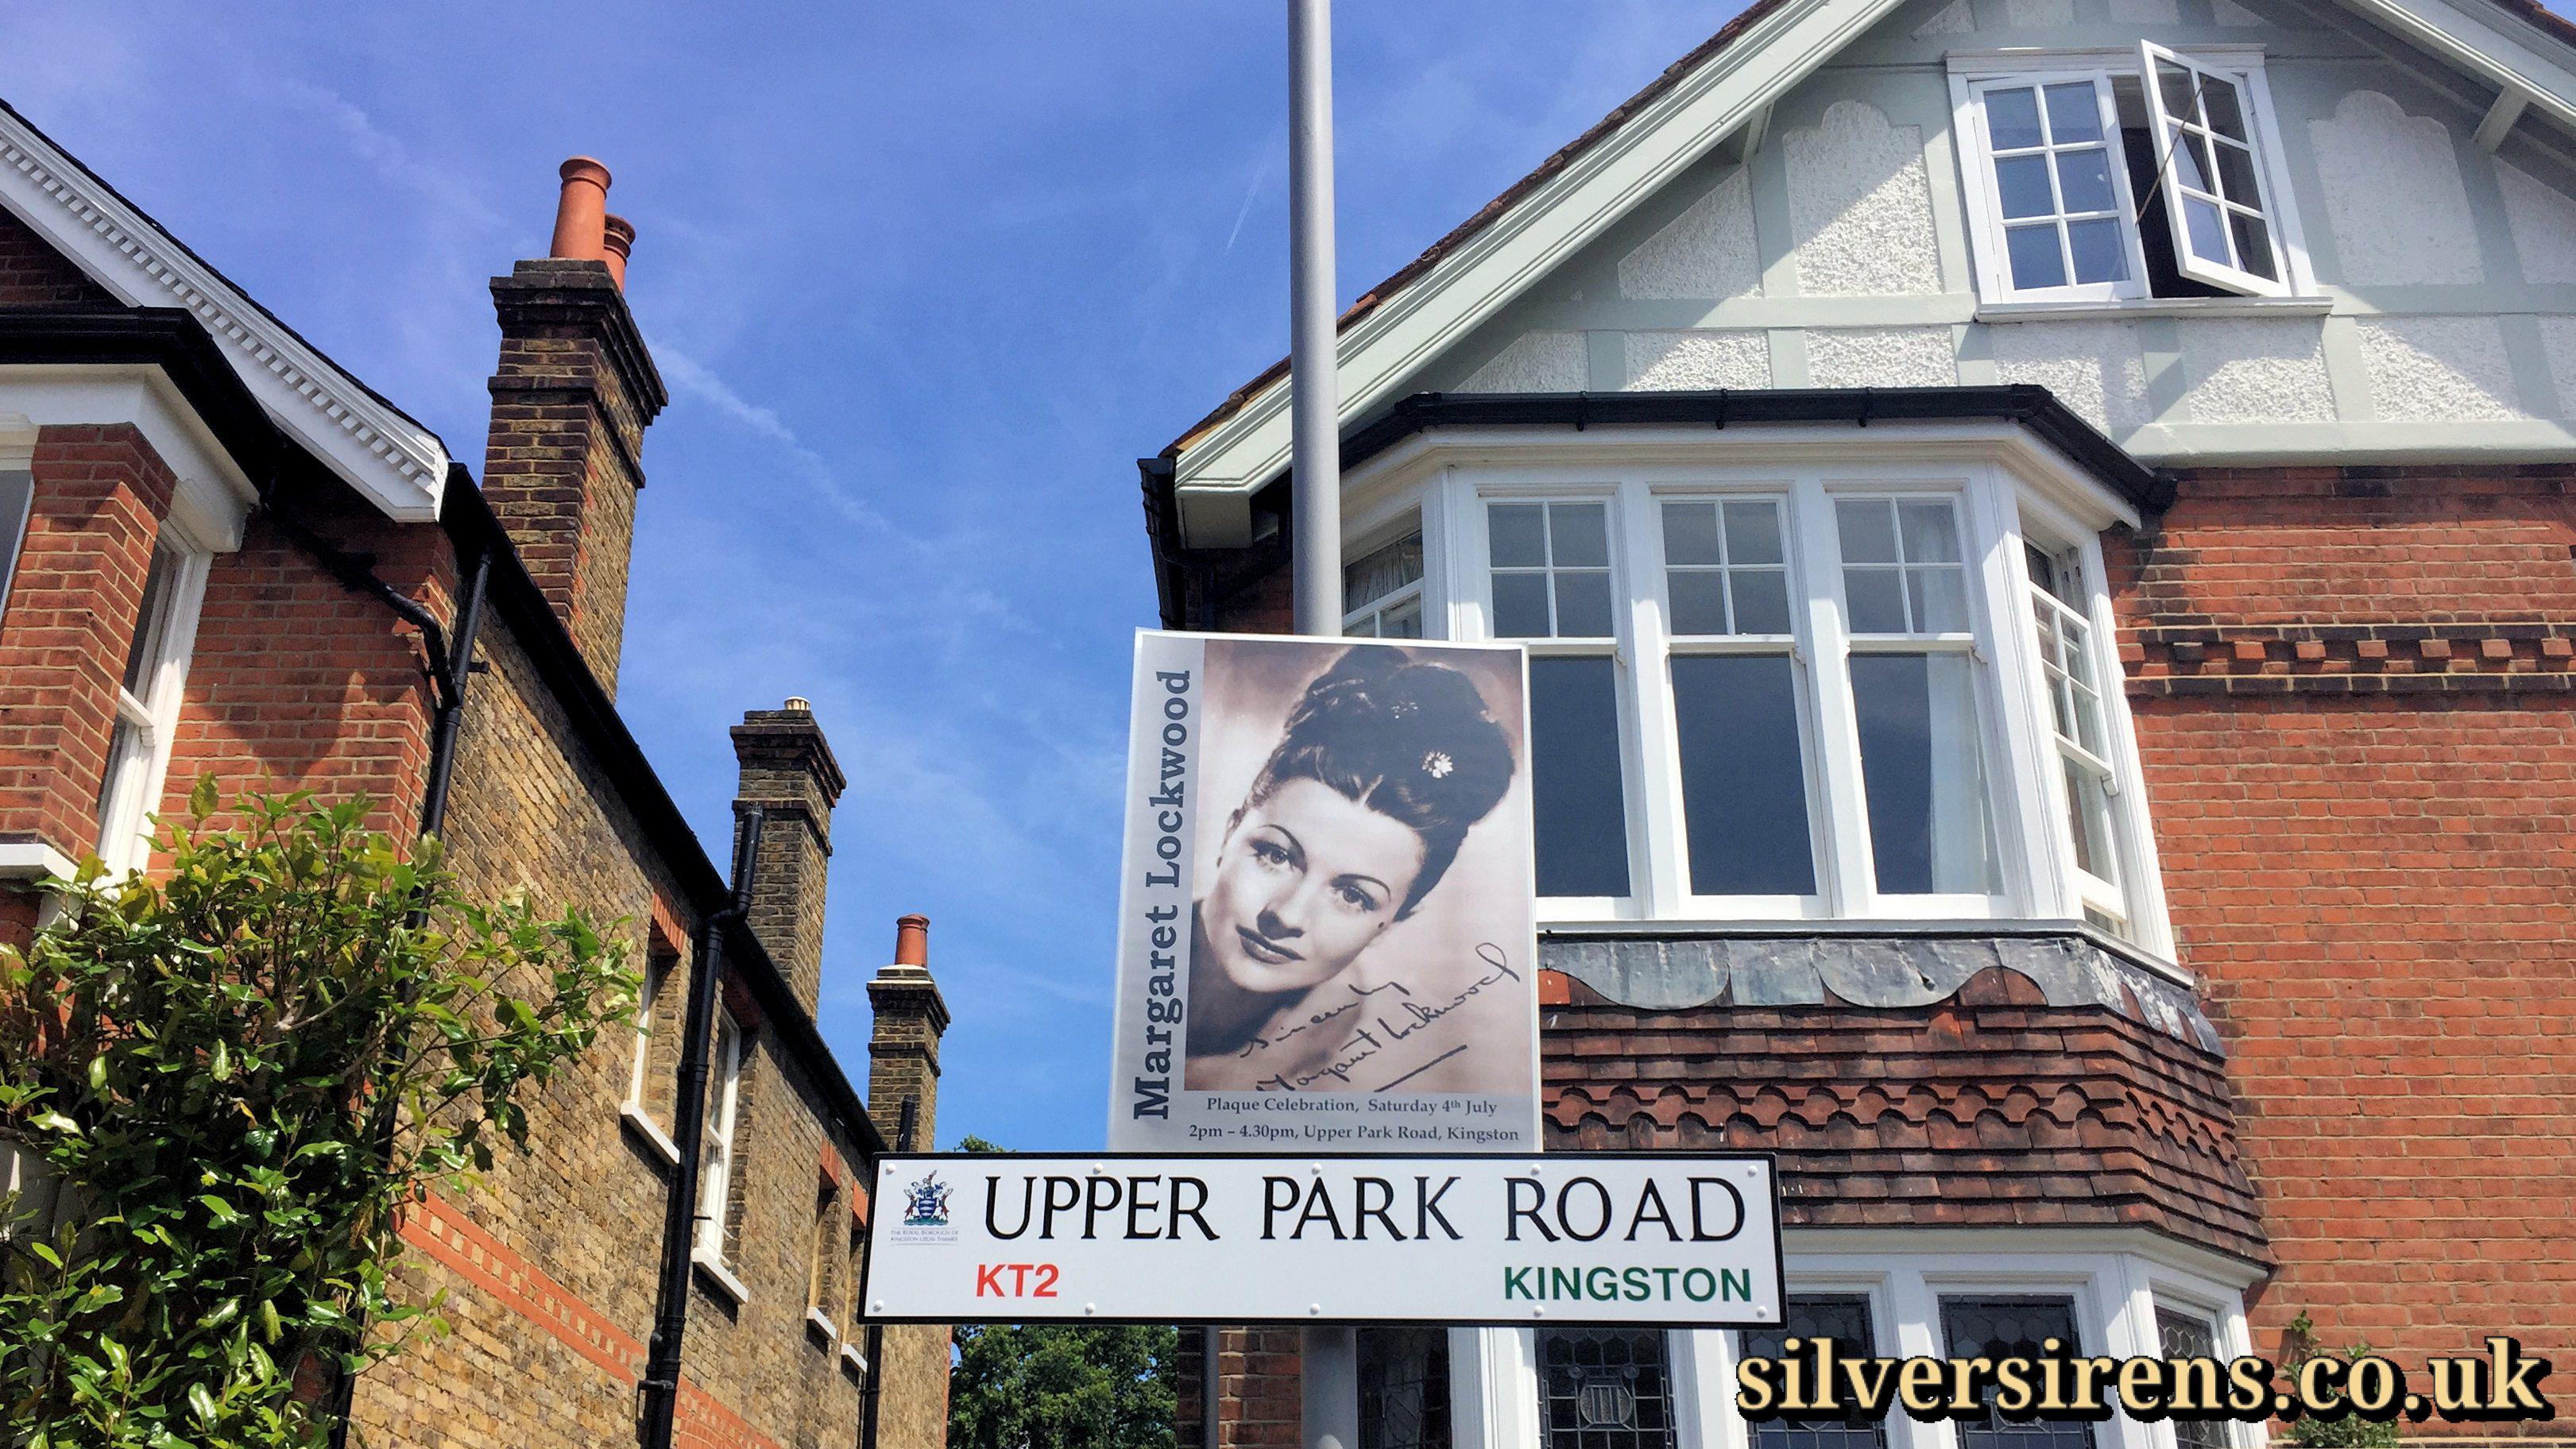 Upper Park Road, Kingston, road sign and poster for the unveiling of a Margaret Lockwood plaque on 4th July, 2015